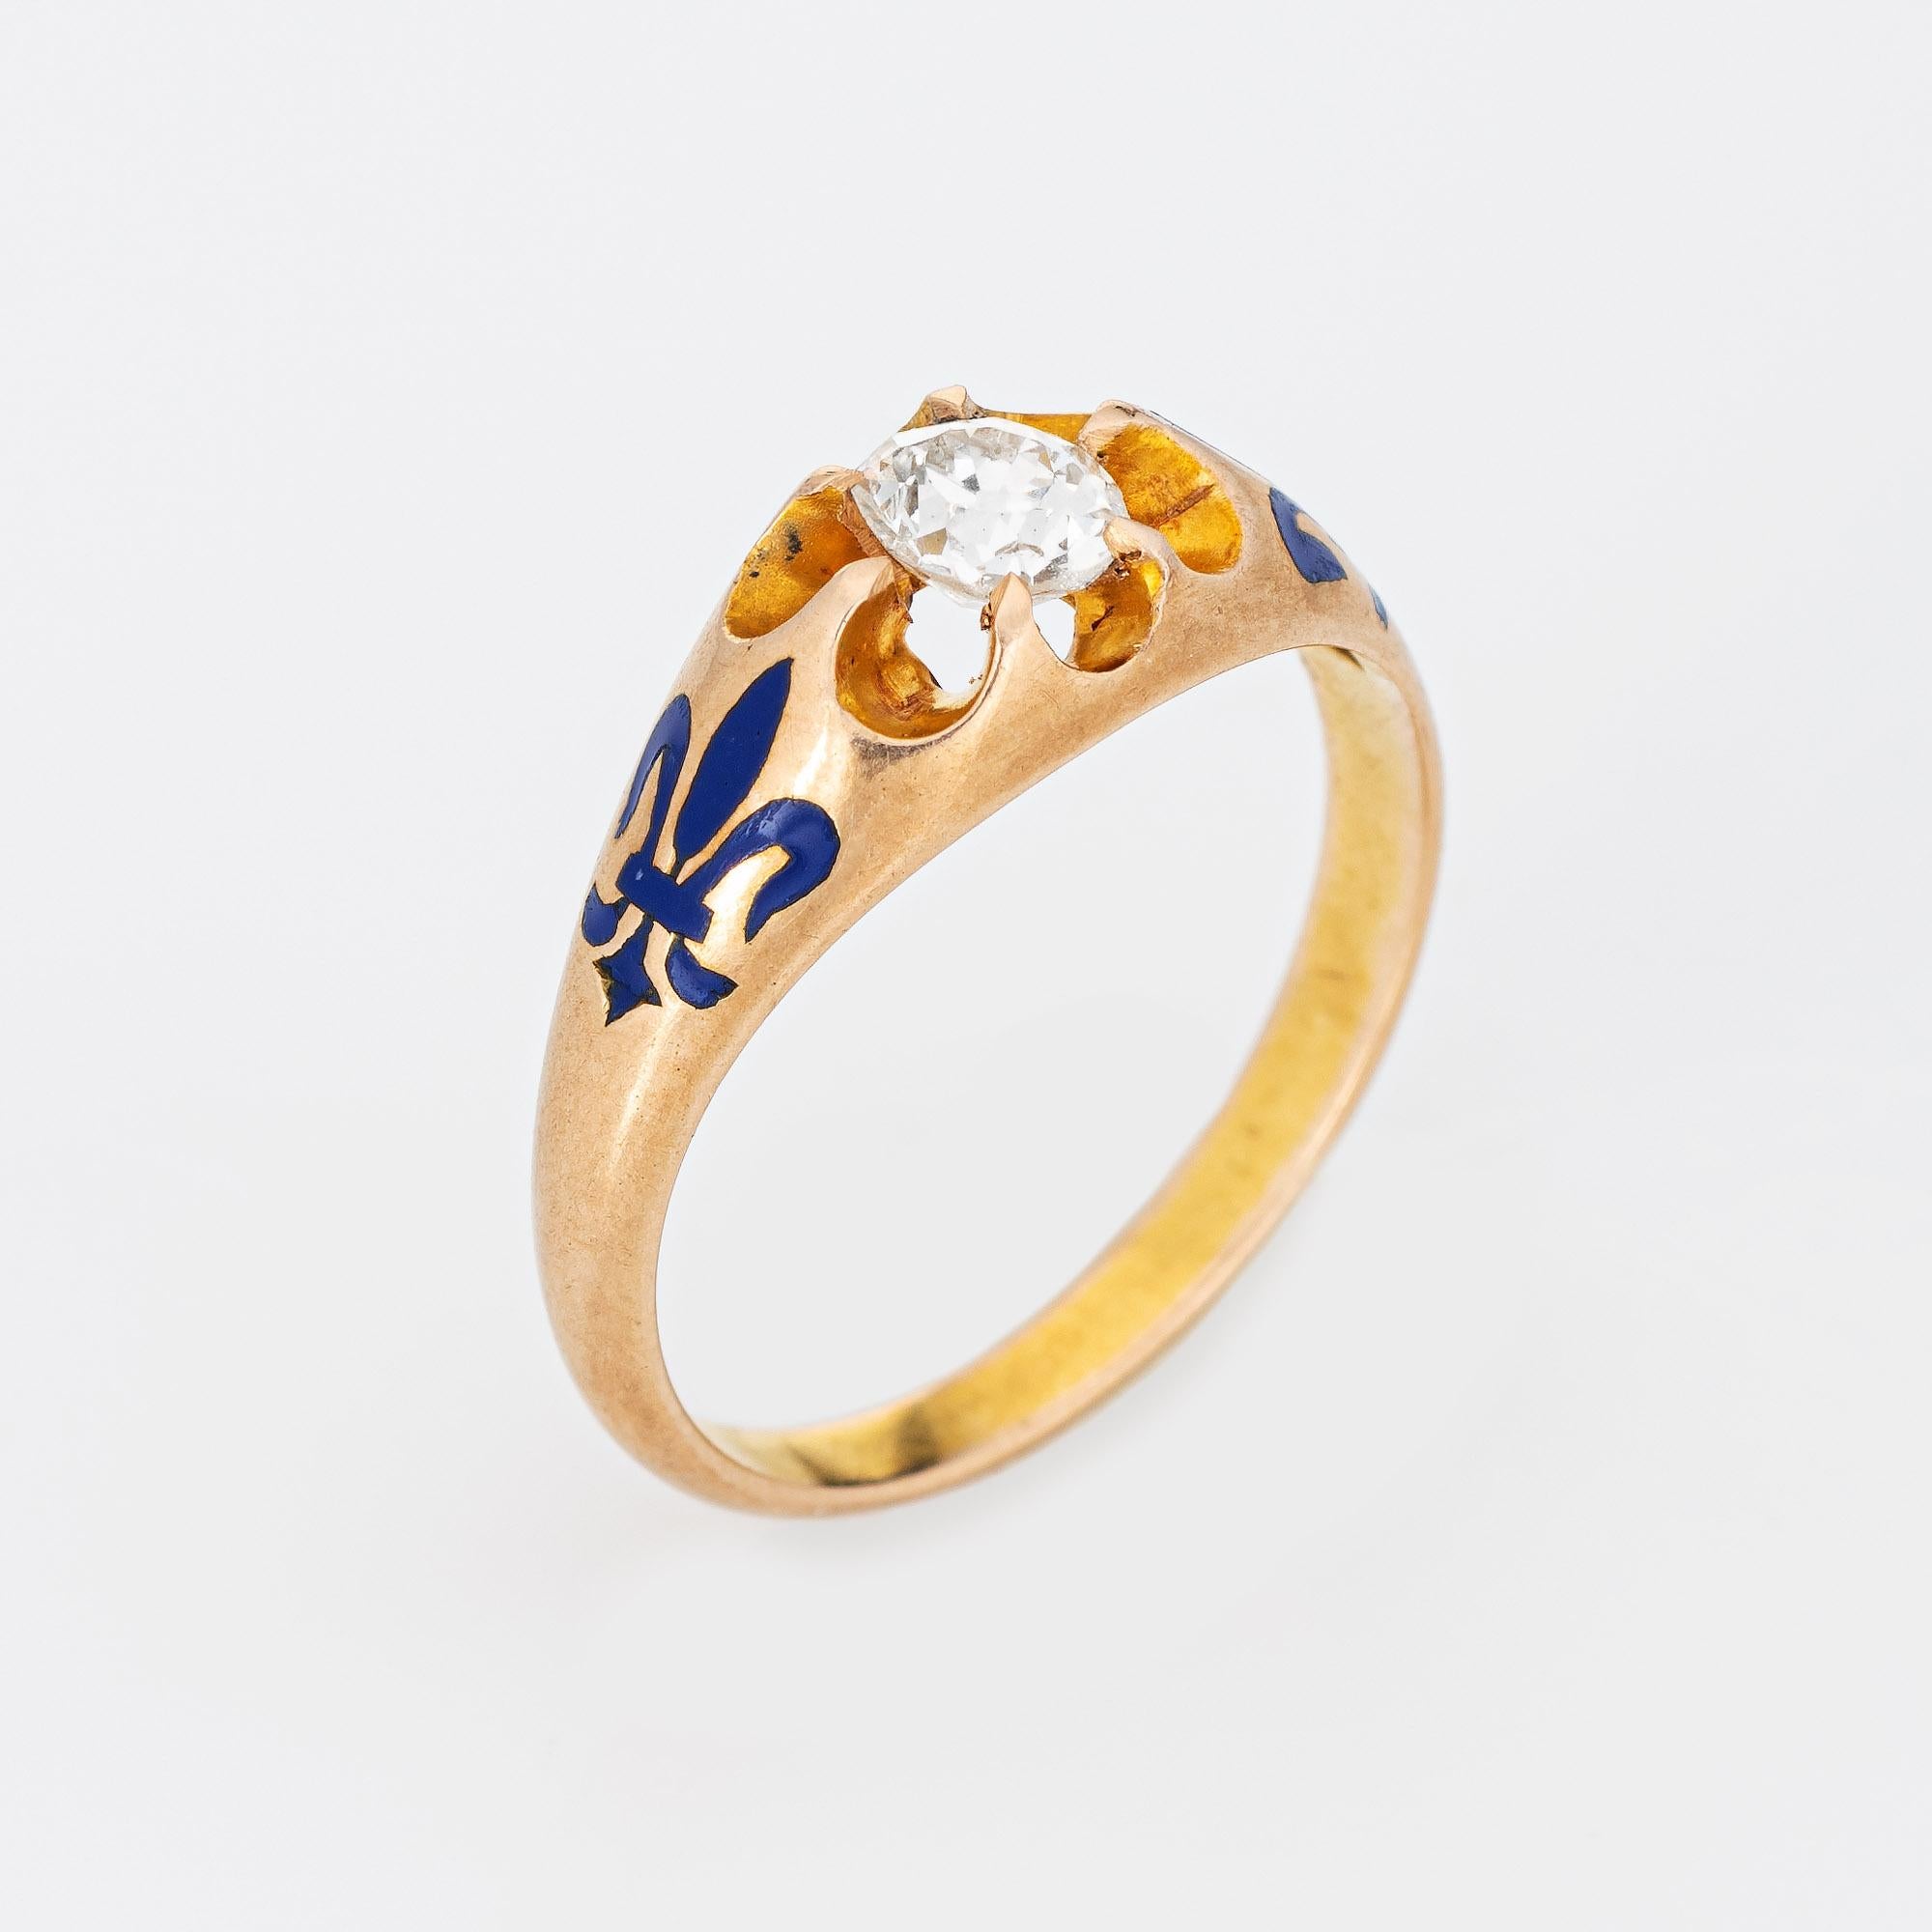 Finely detailed antique Victorian diamond engagement ring (circa 1880s to 1900s), crafted in 14 karat yellow gold. 

Antique cushion cut diamond is estimated at 0.45 carats (estimated at J-K color and SI2 clarity).  

The sweet Victorian era ring